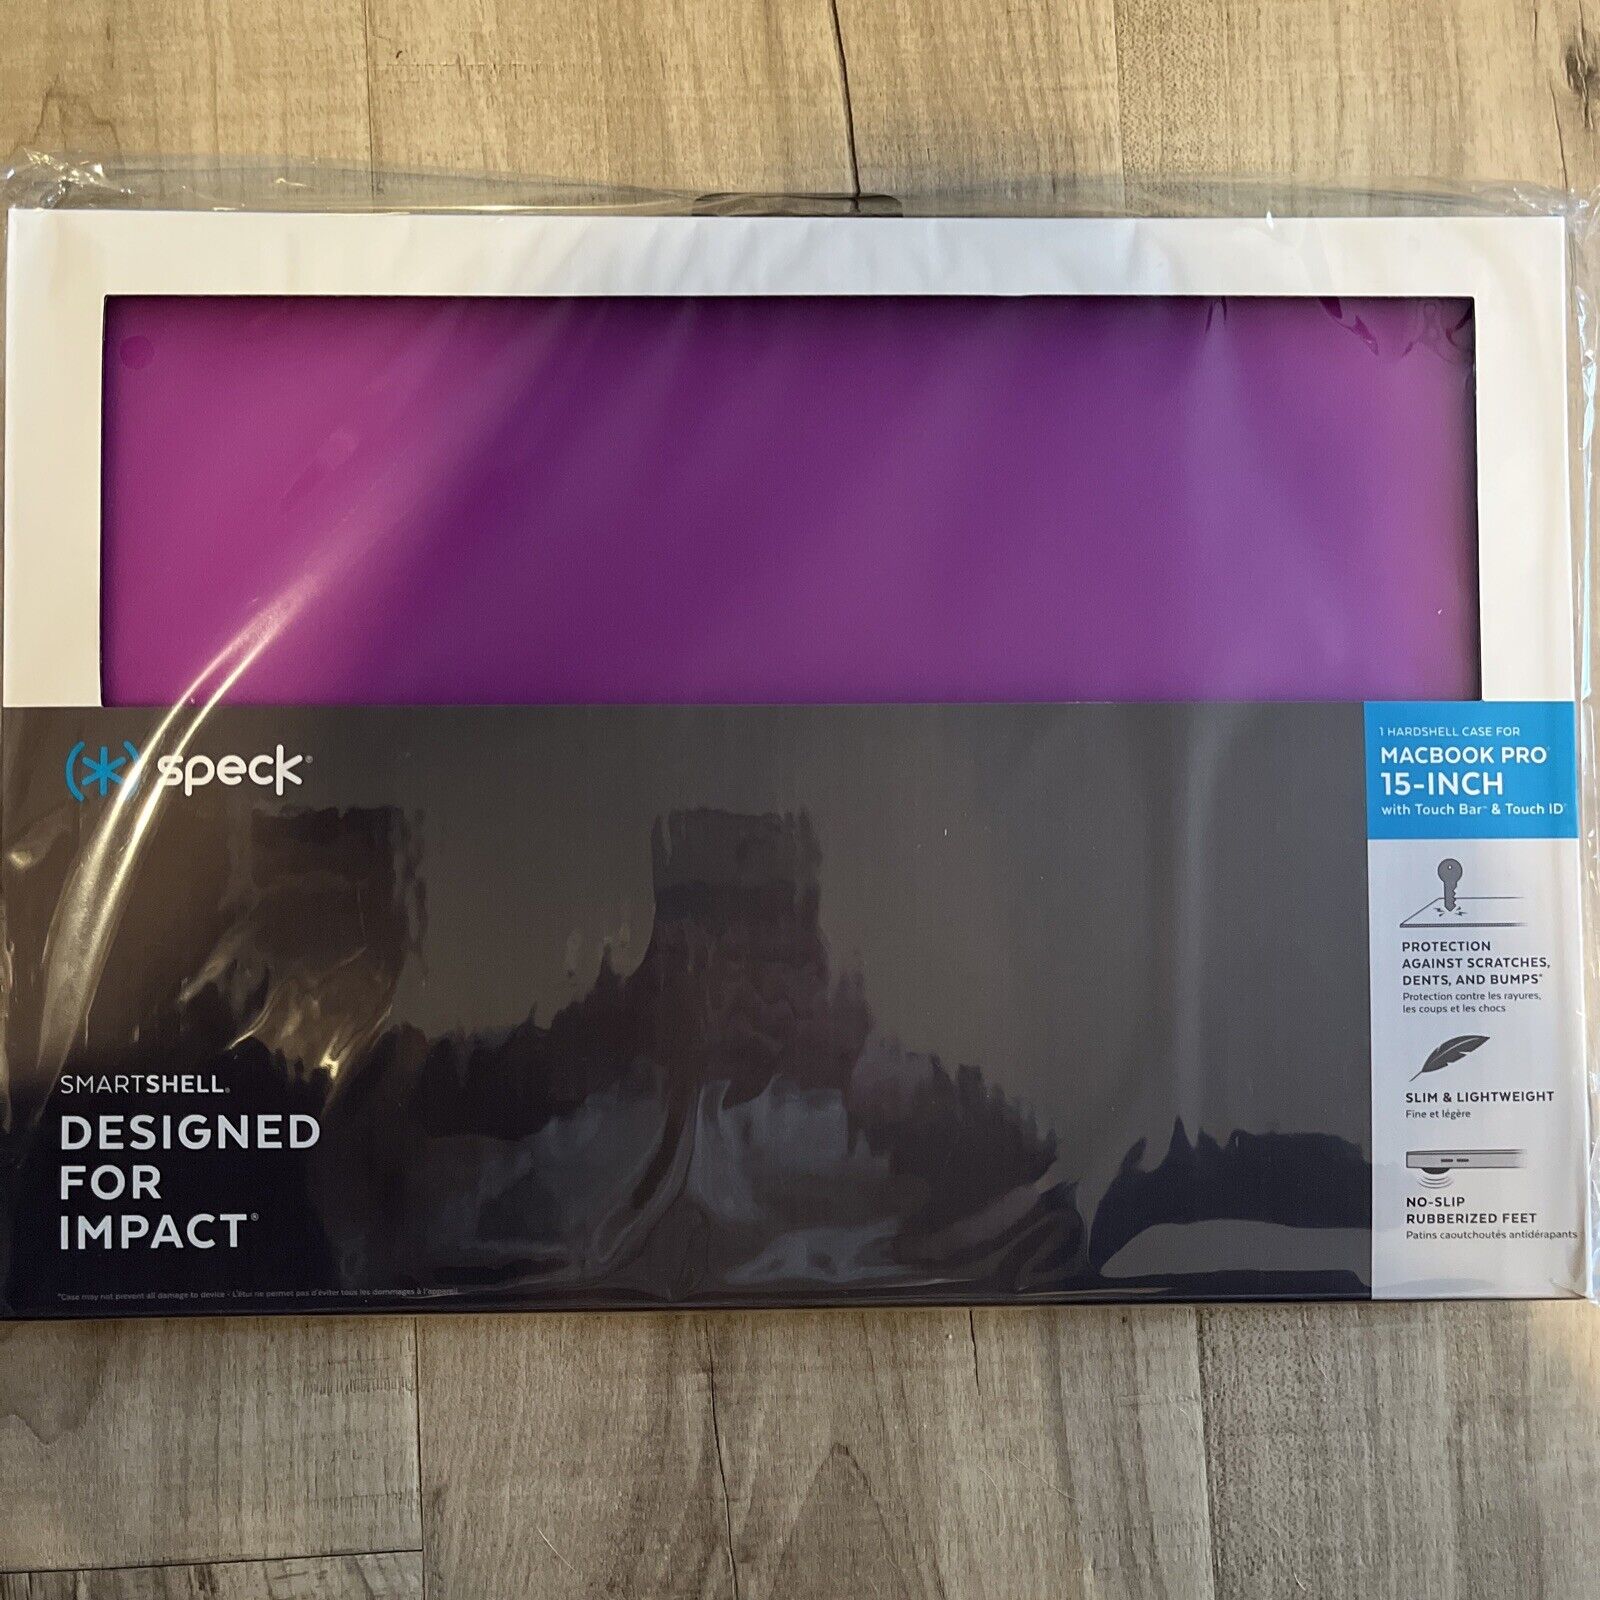 NEW Speck Smartshell Case for Macbook Pro 15 Inch w/ Touch Bar & Touch ID Purple